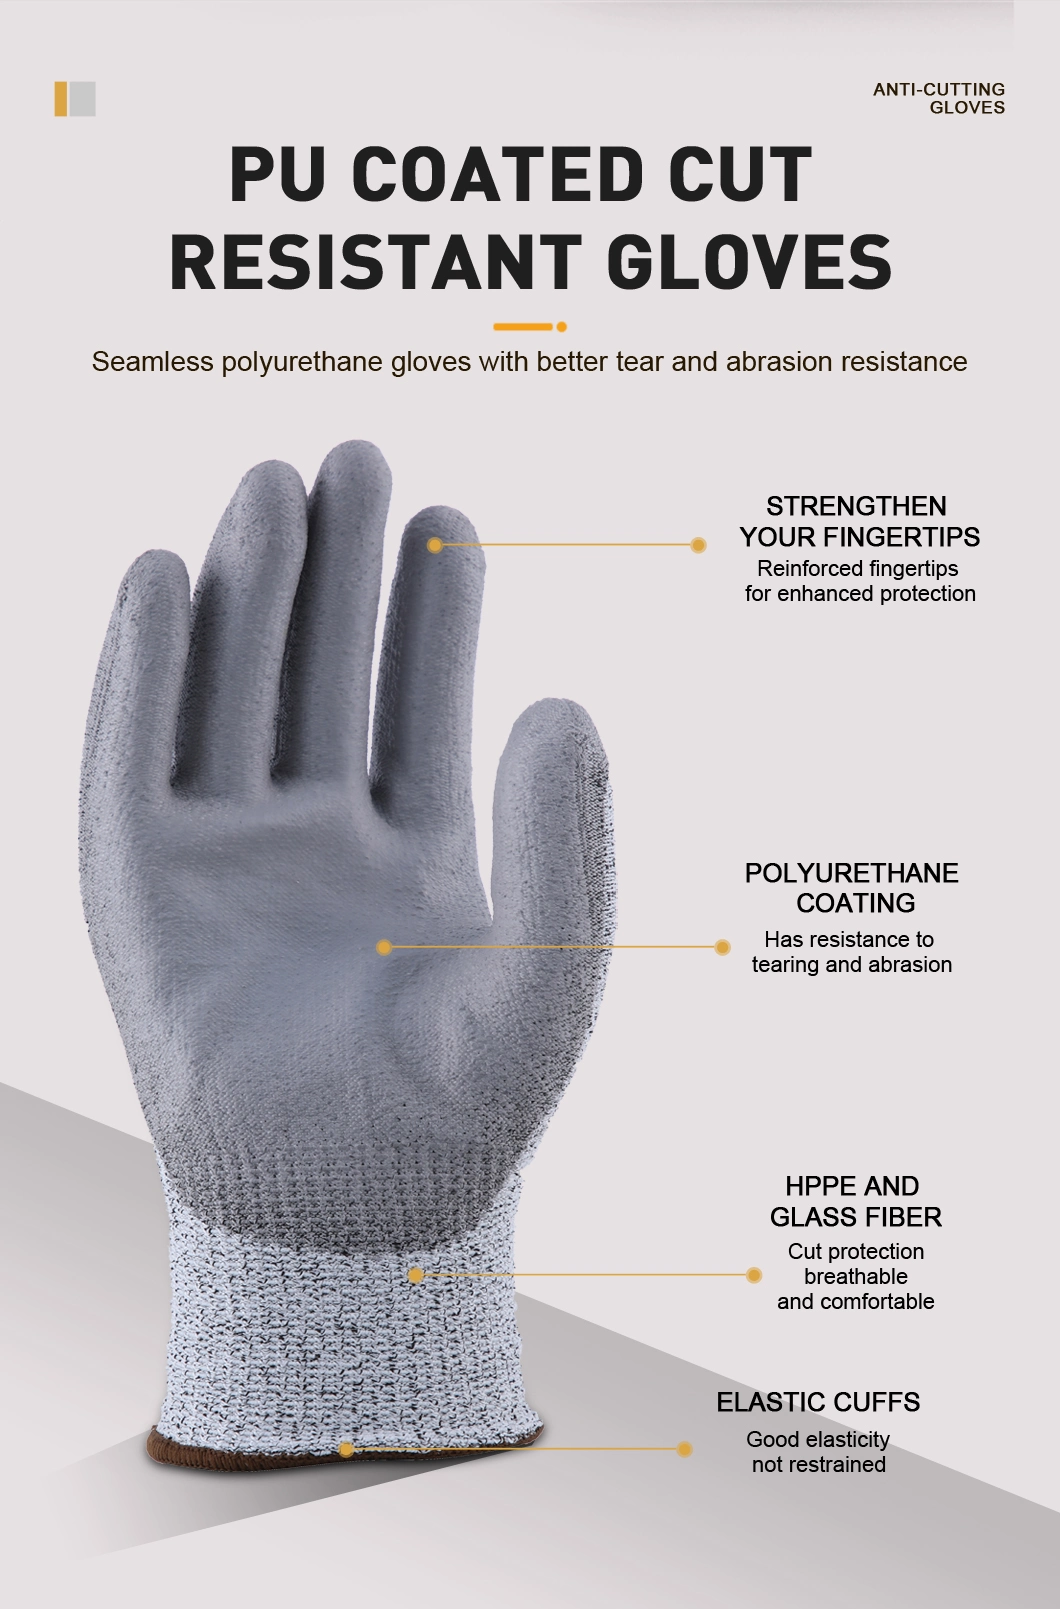 CE Hppe Seamless Hand Protect Mechanic Work Safety Working White PU Anti Cut Proof White Cut Resistant Labor Glove